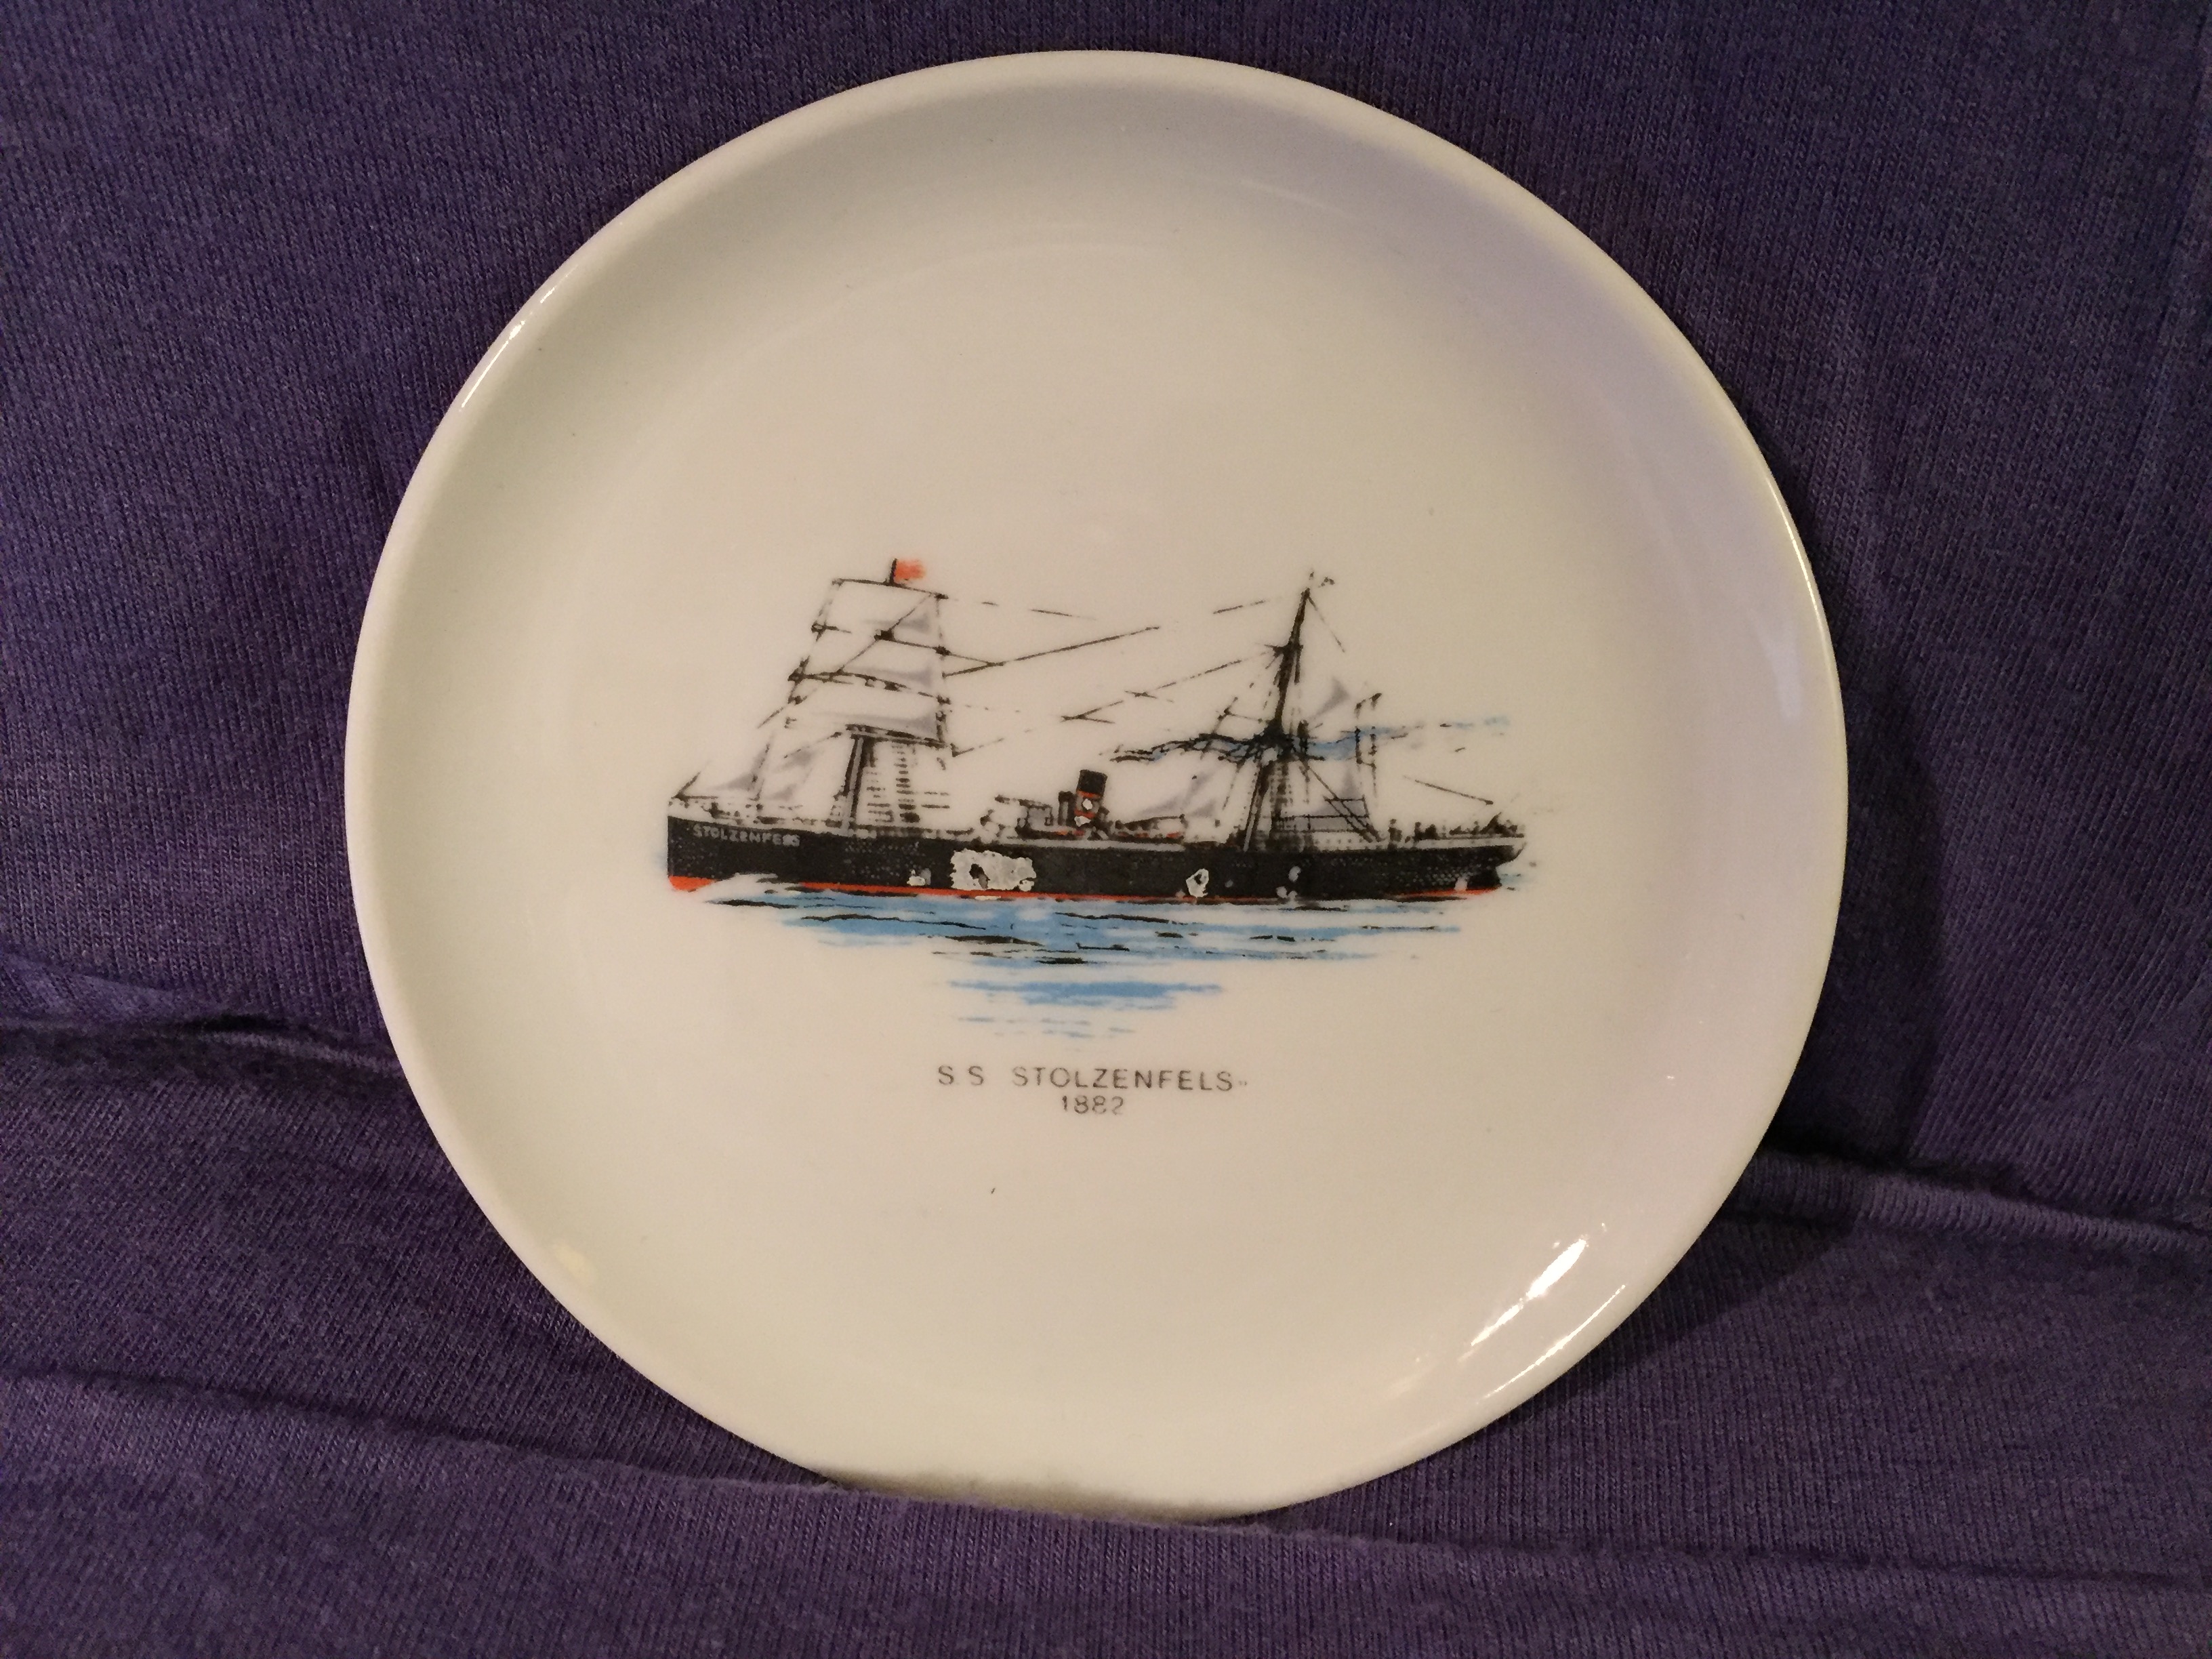 SMALL SOUVENIR DISH FROM THE VESSEL THE SS STOLENFELZ